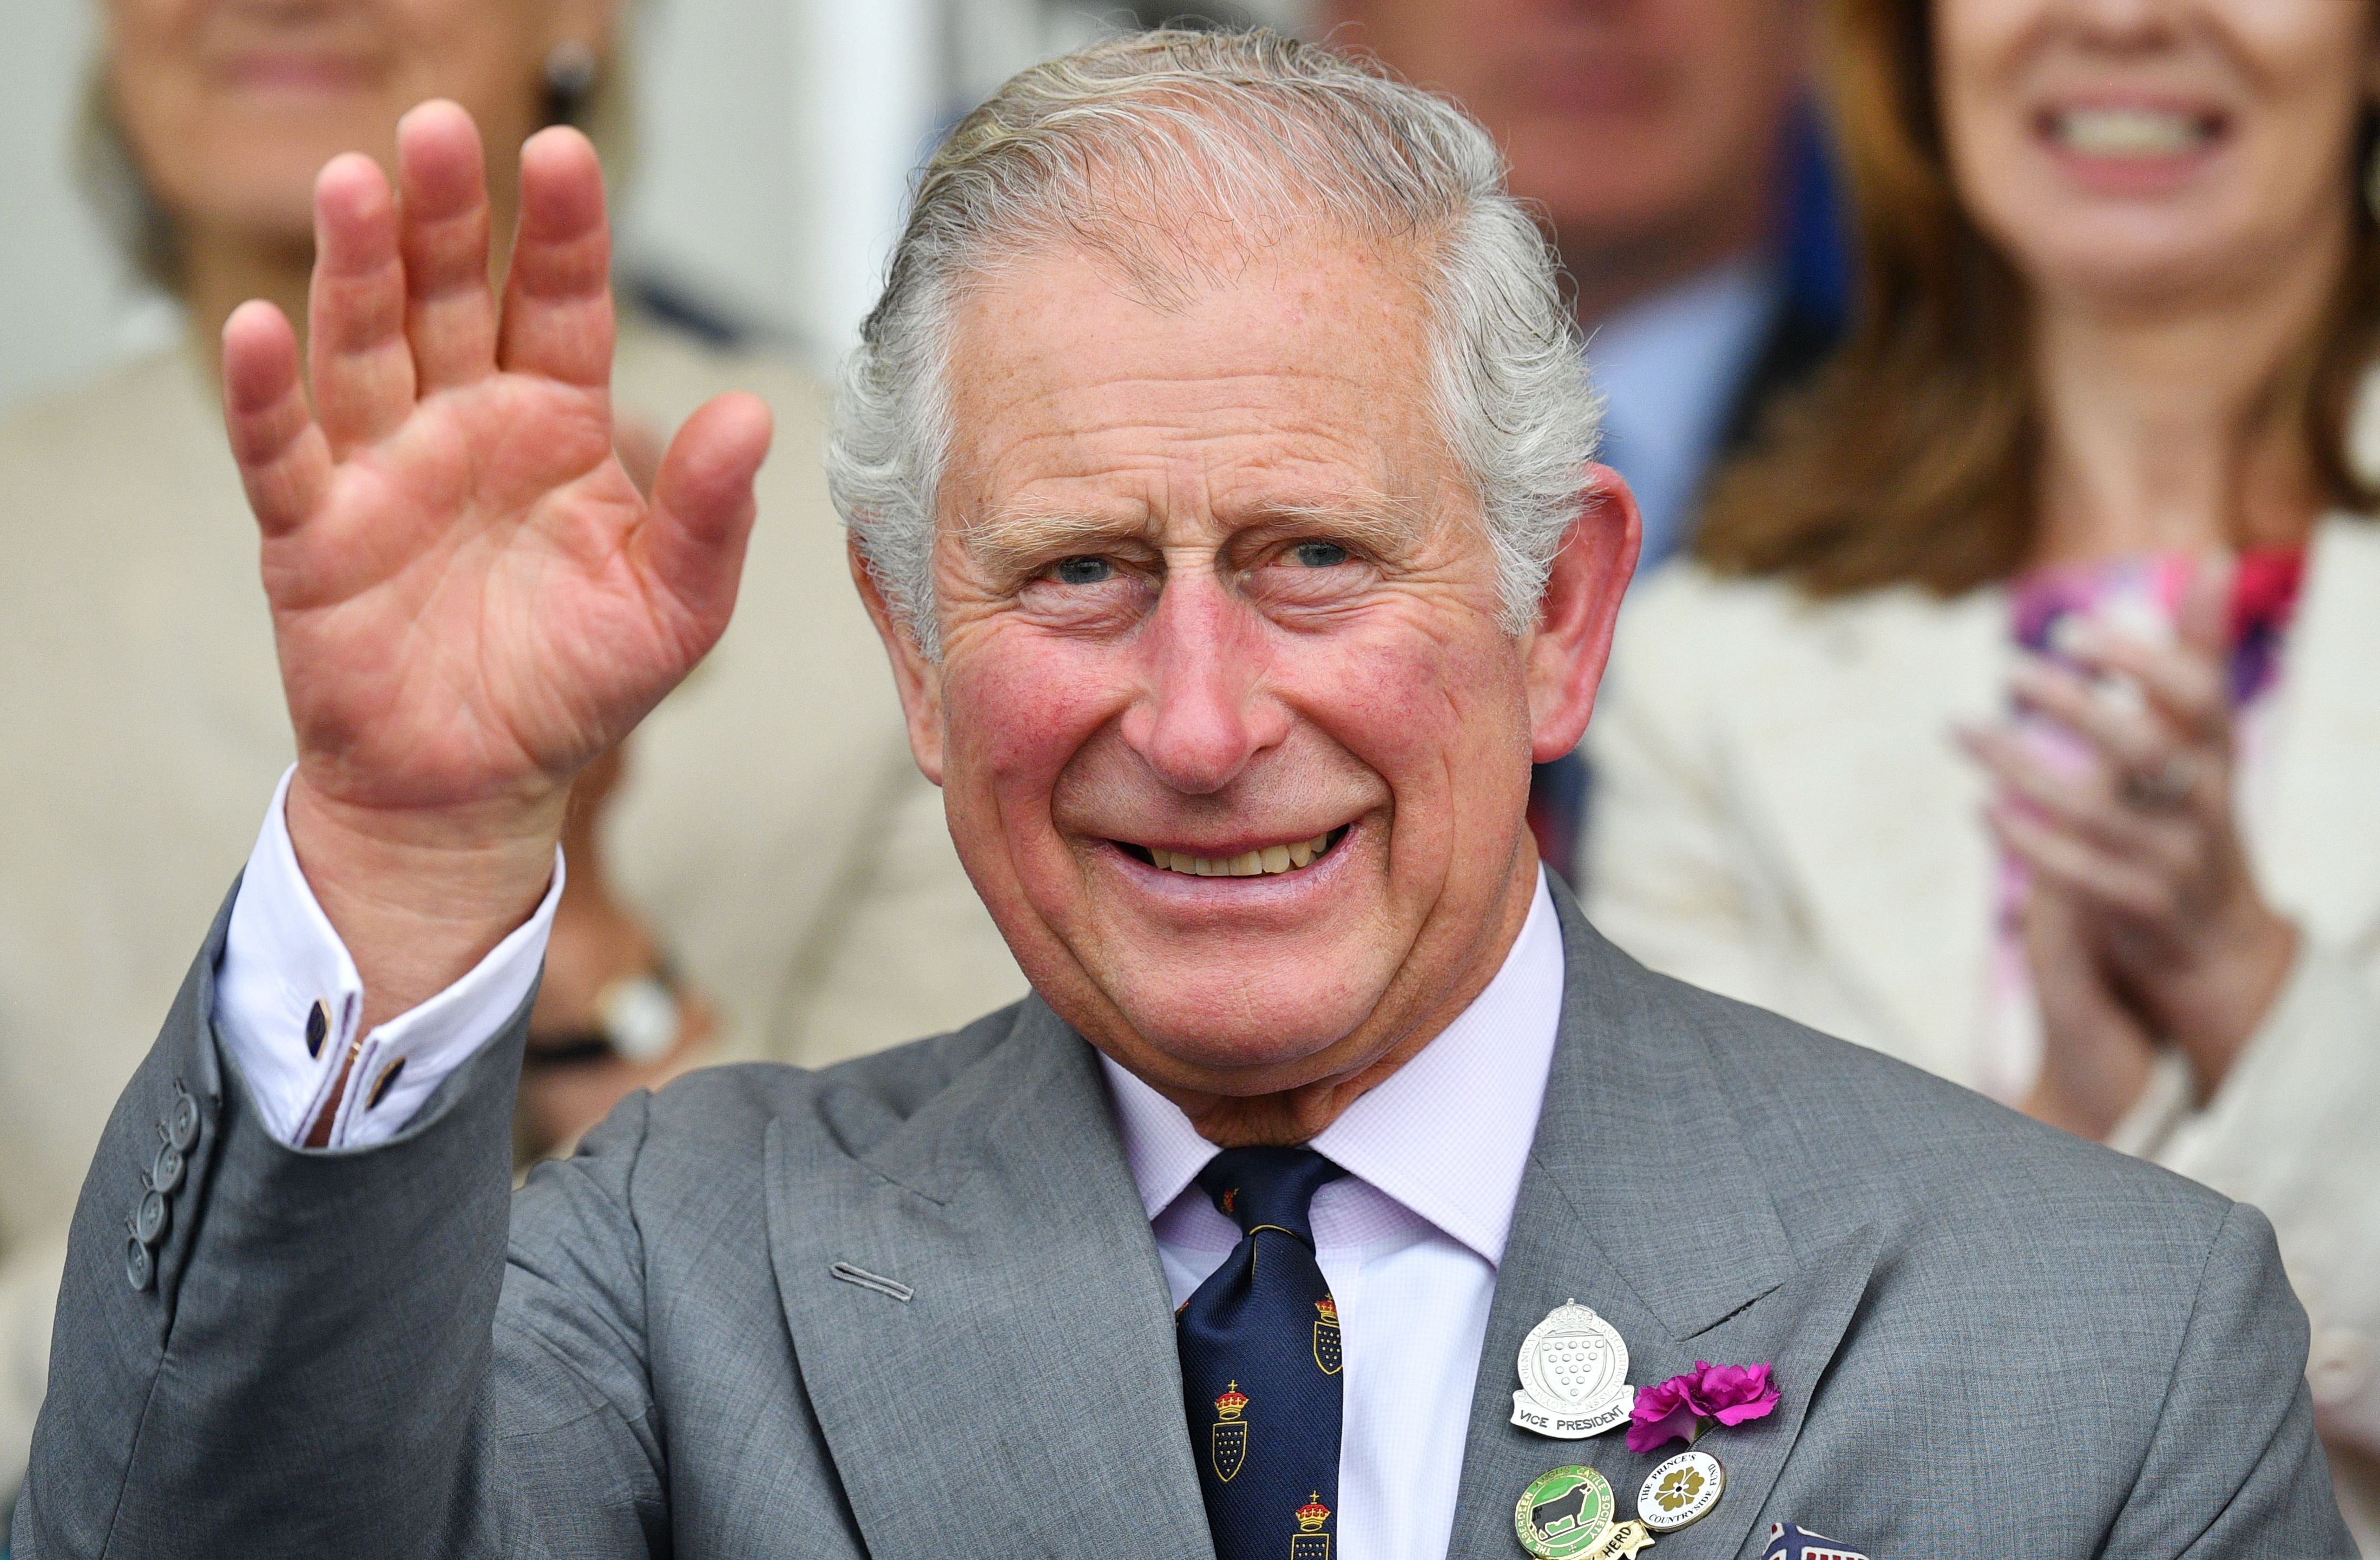 King Charles waves during an event.